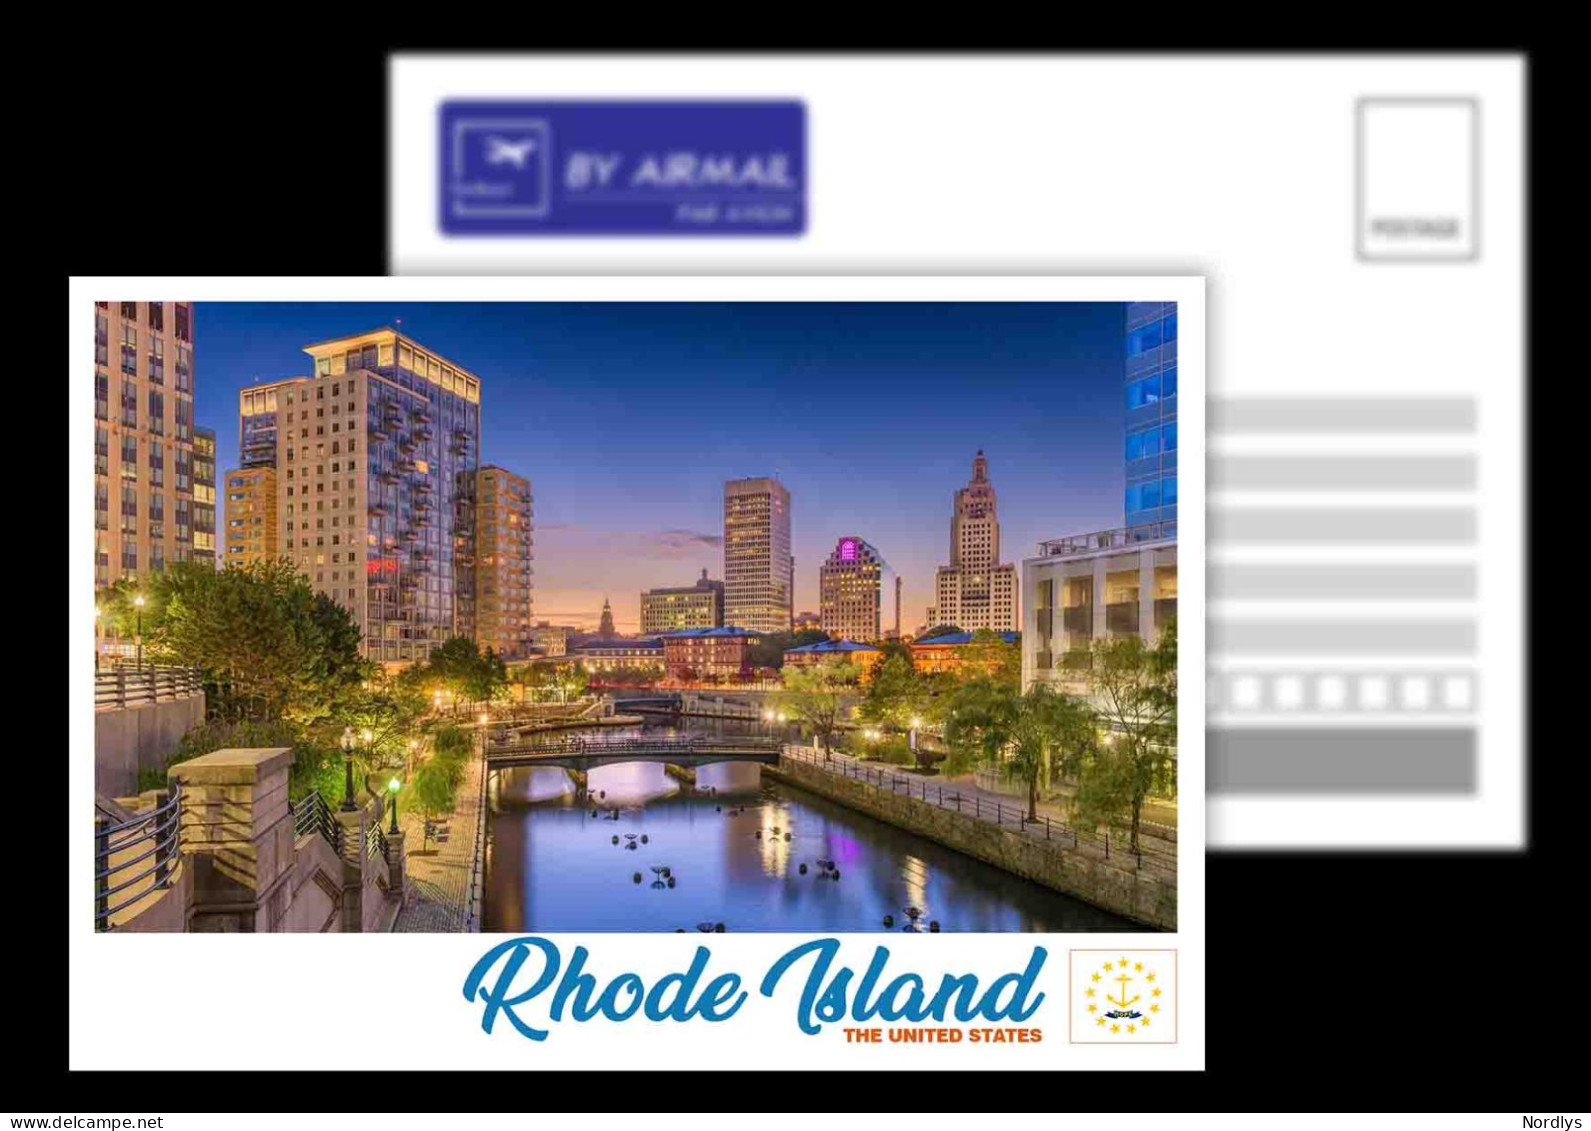 Rhode Island / US States / View Card - Providence